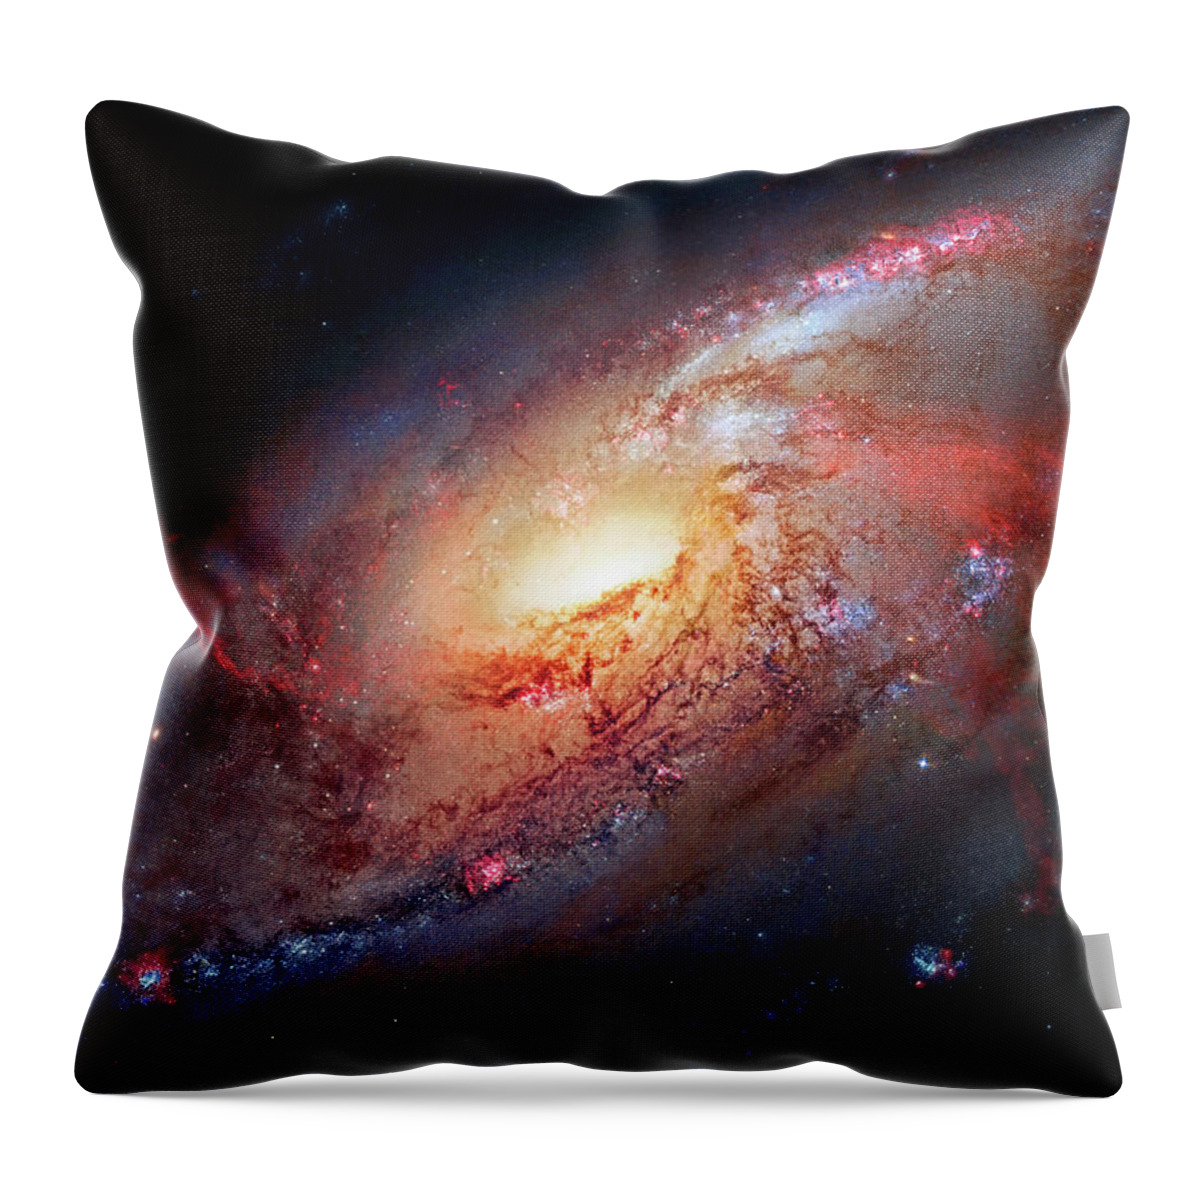 M 106 Throw Pillow featuring the photograph M 106 by Weston Westmoreland